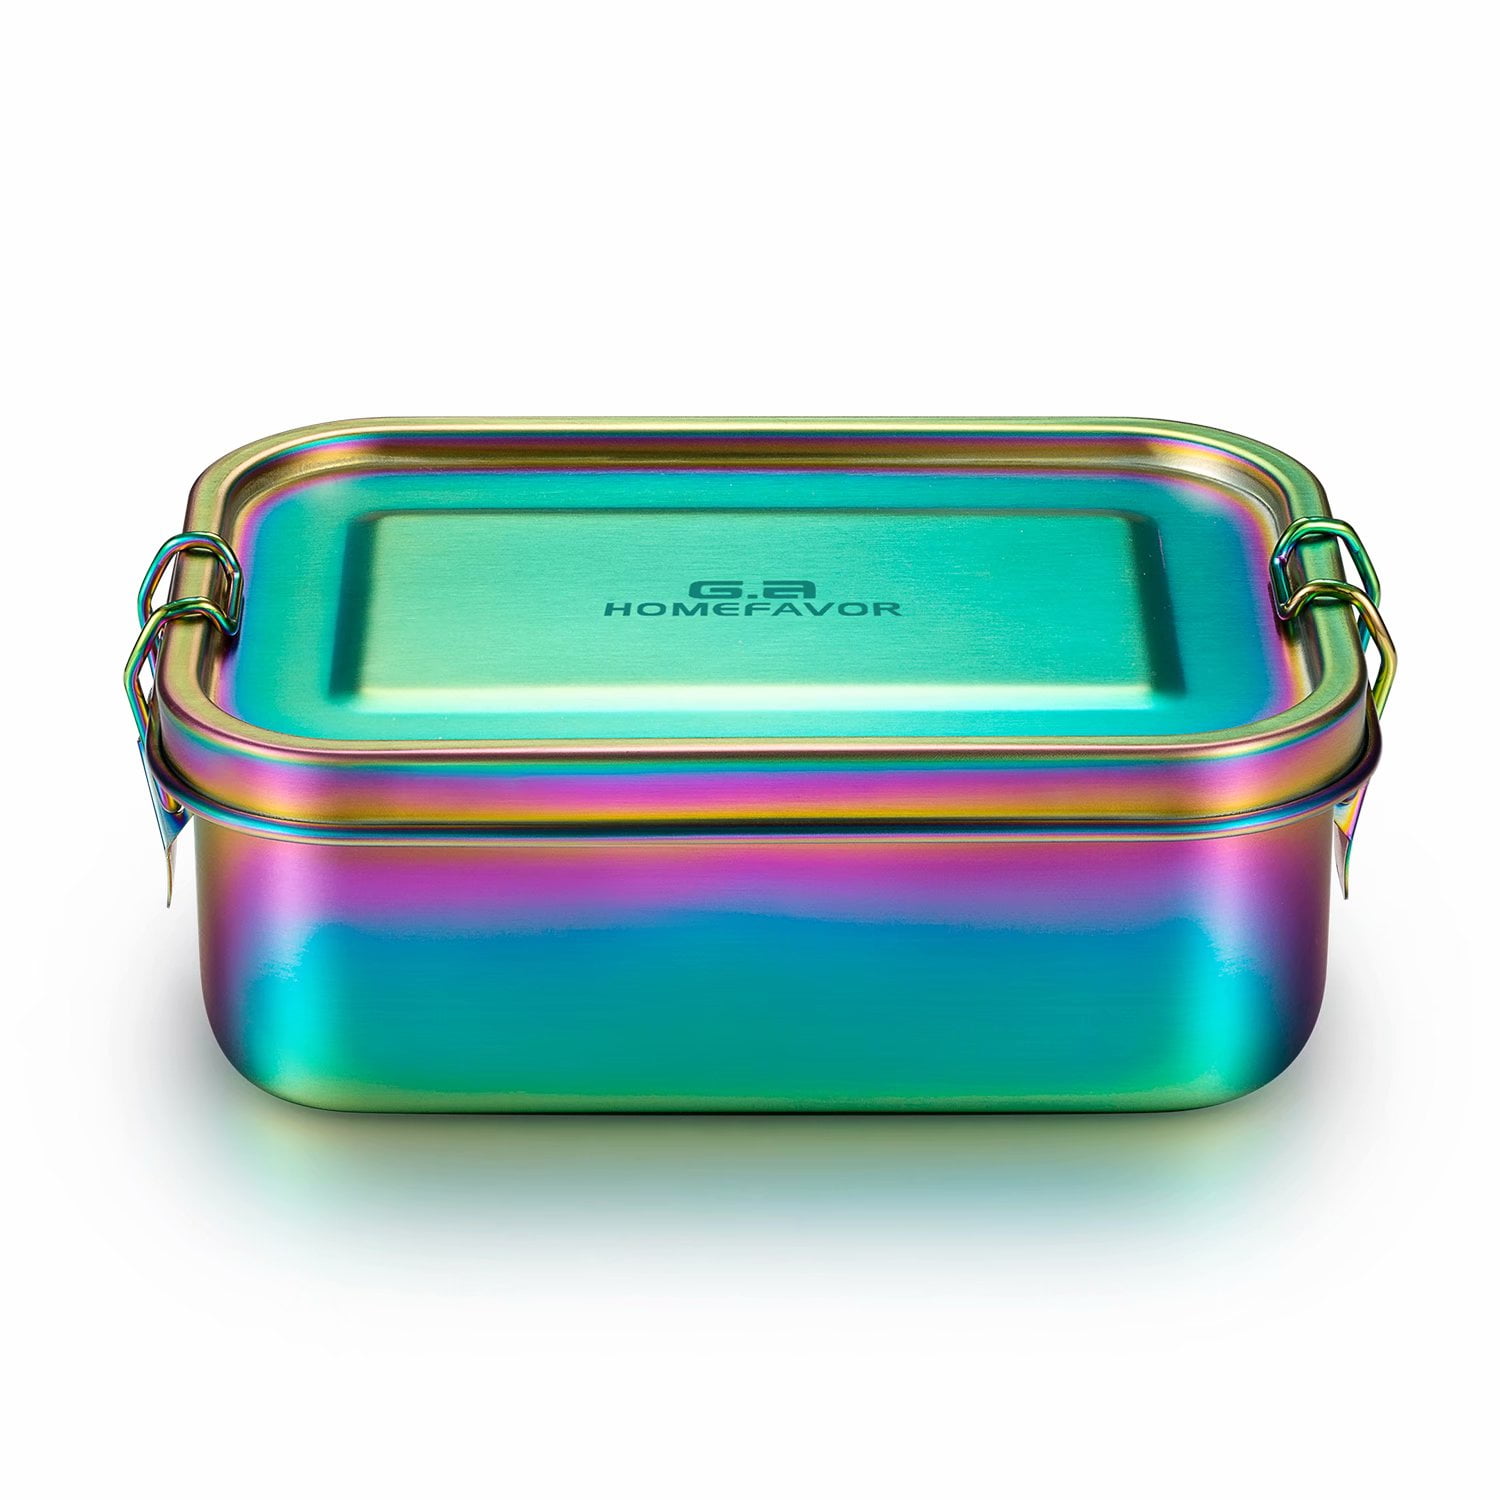 Ga HOMEFAVOR Leak Proof Stainless Steel Bento Box, Metal Lunch Container  with 3-Compartment, 1200ML, Perfect for Snacks and Salad, Dishwasher Safe